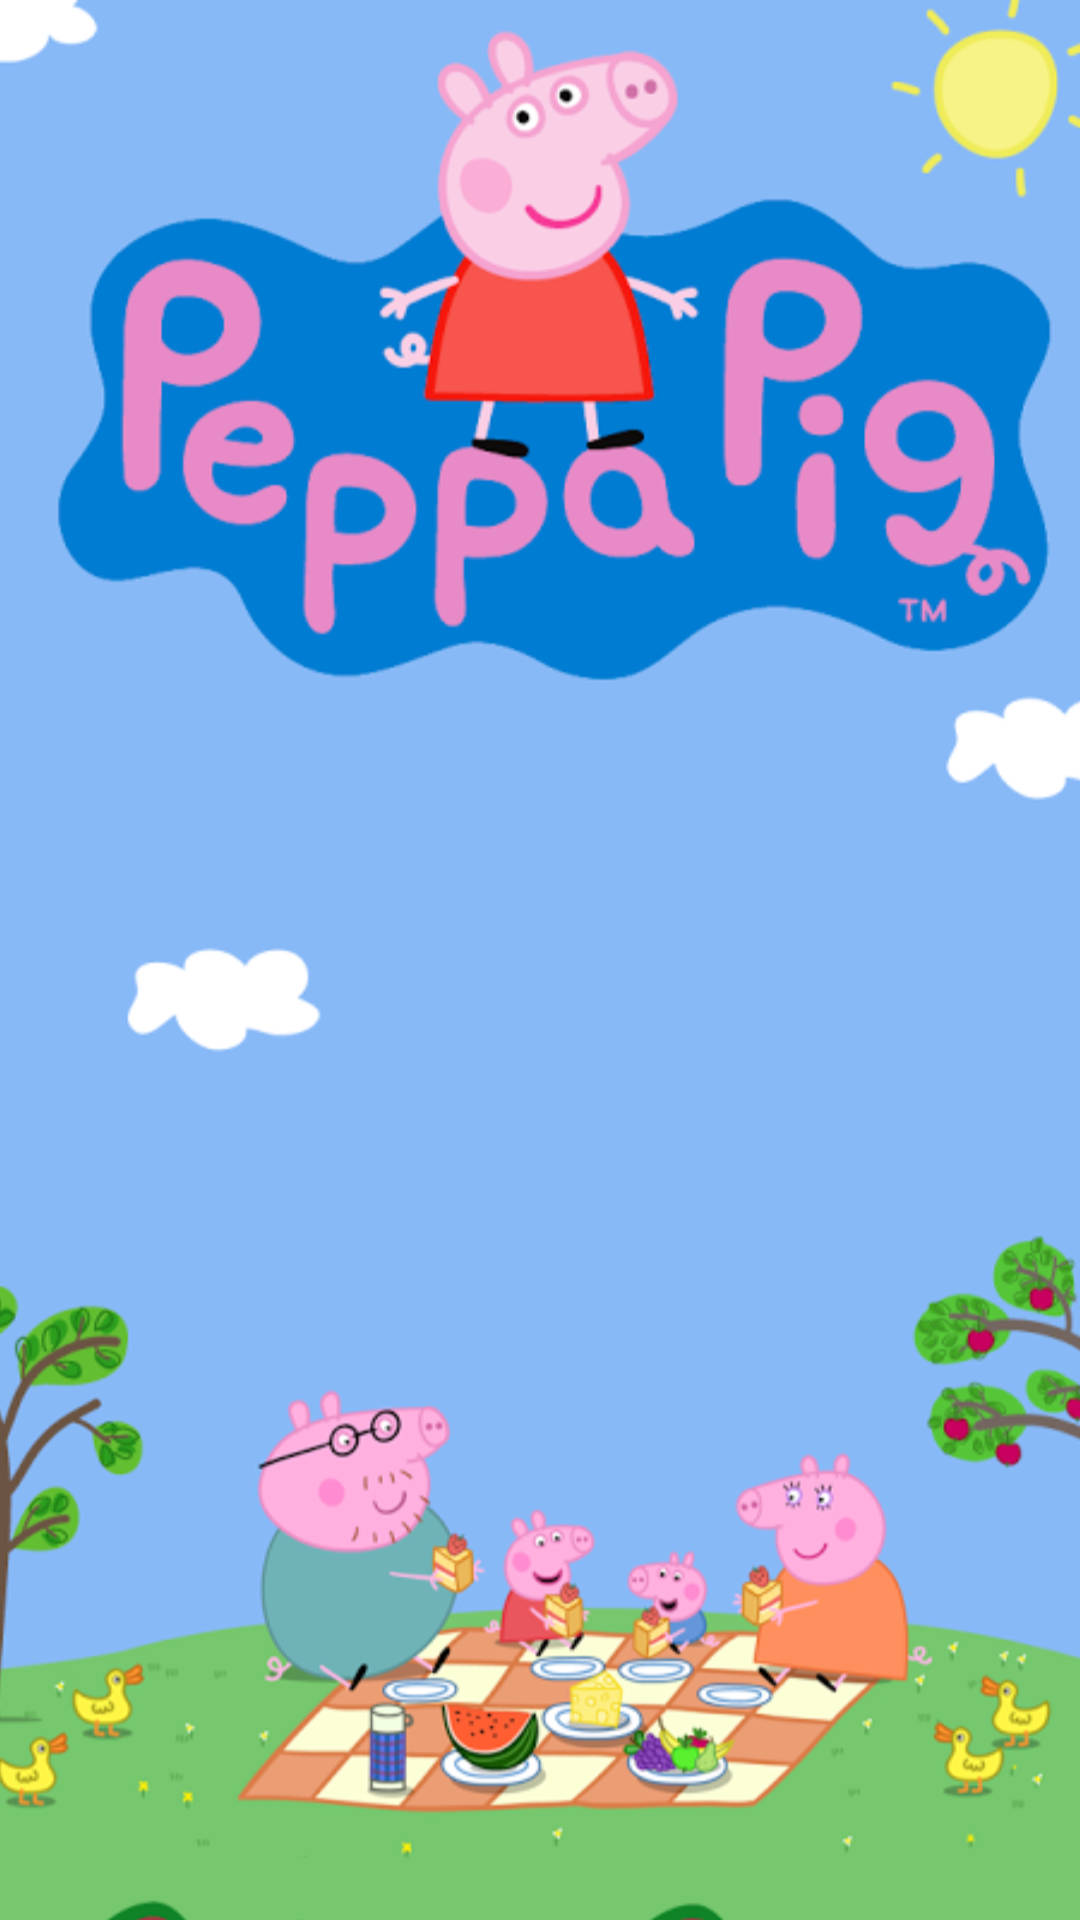 Peppa Pig Iphone Family Picnic Outdoors Wallpaper